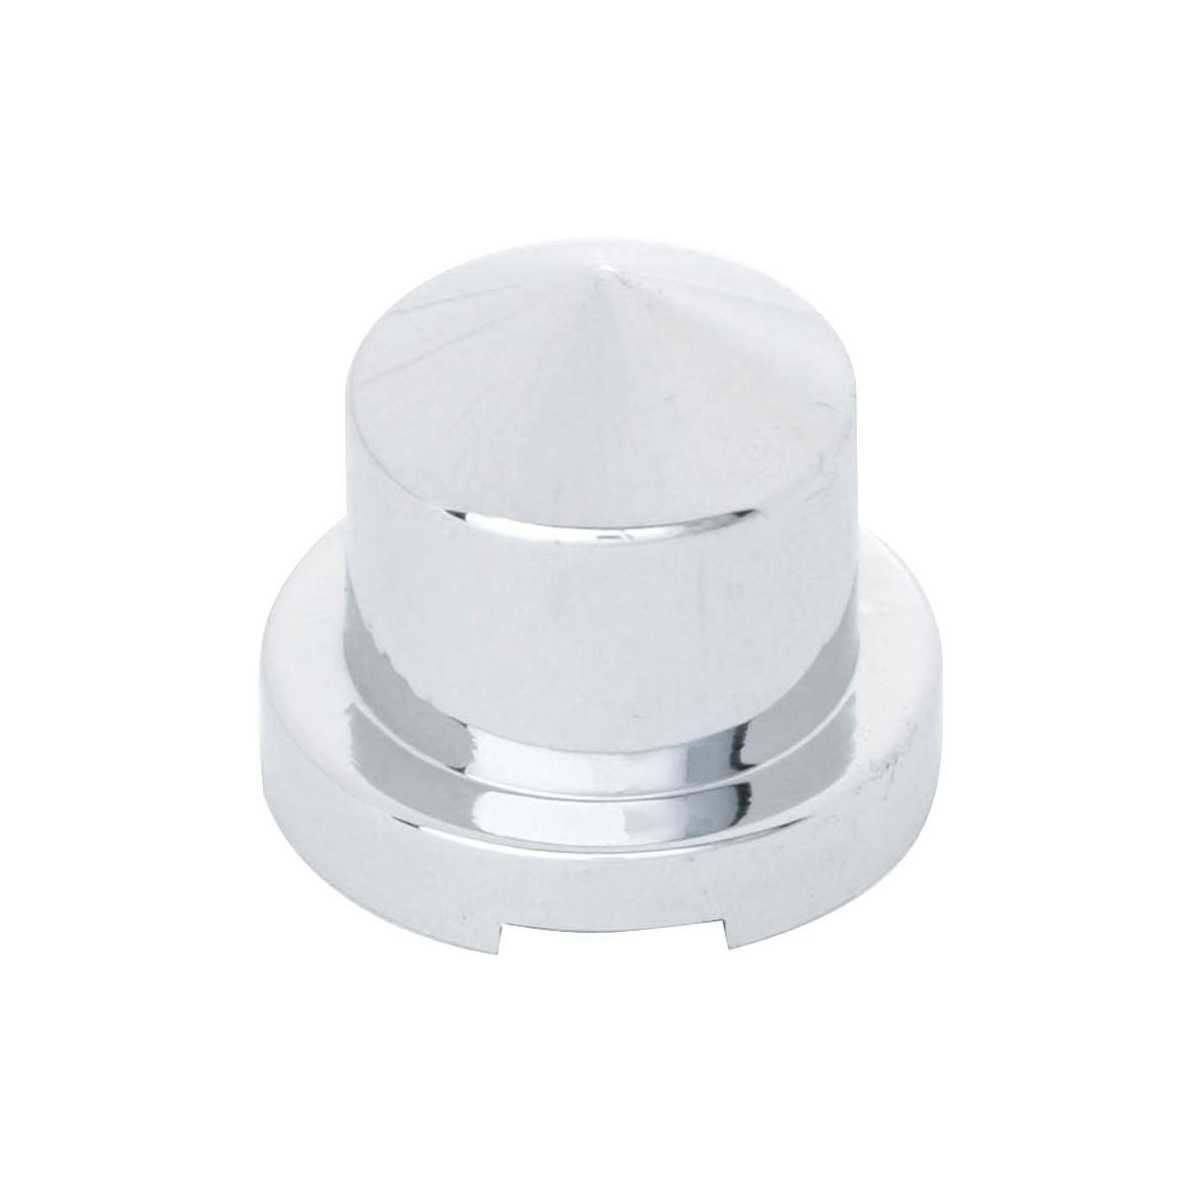 1/2 Inch x 13/16 Inch Chrome Plastic Pointed Nut Cover - Push-On